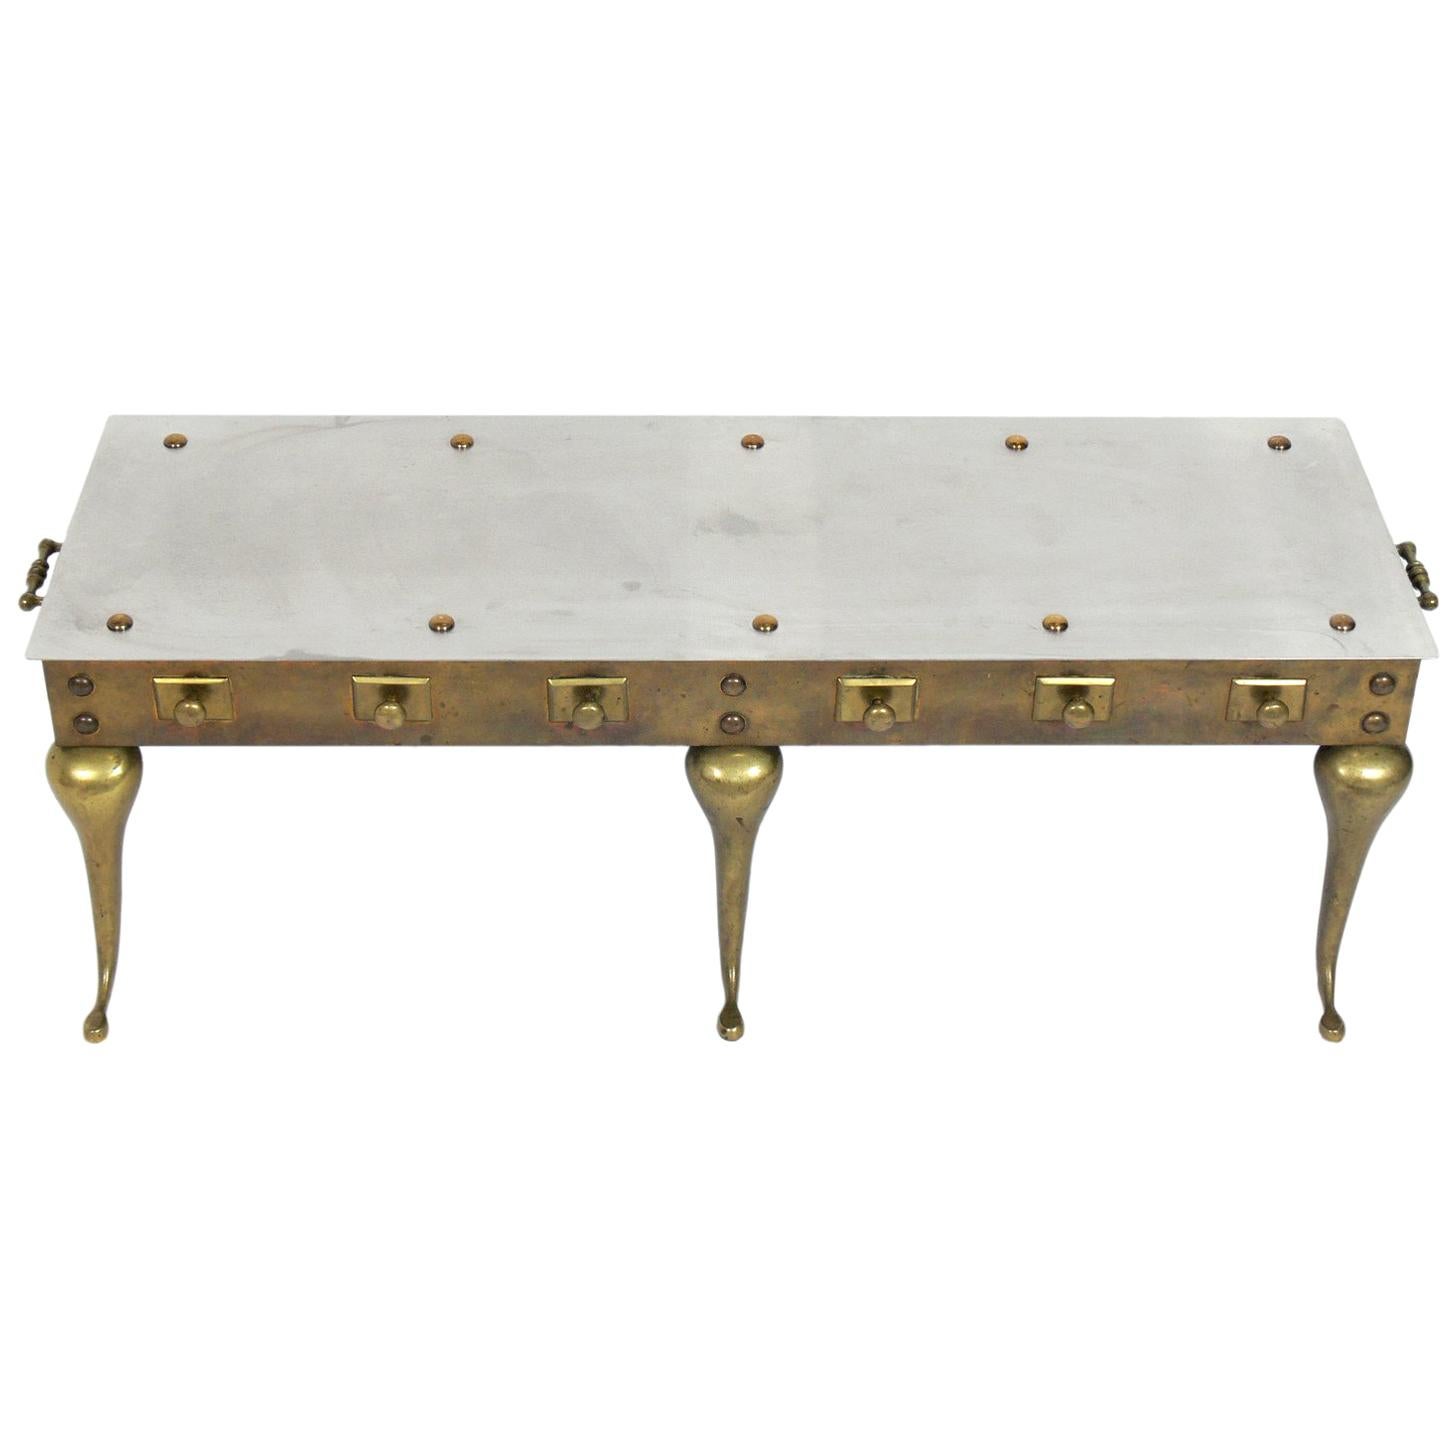 Brass and Steel Footman Coffee Table or Bench